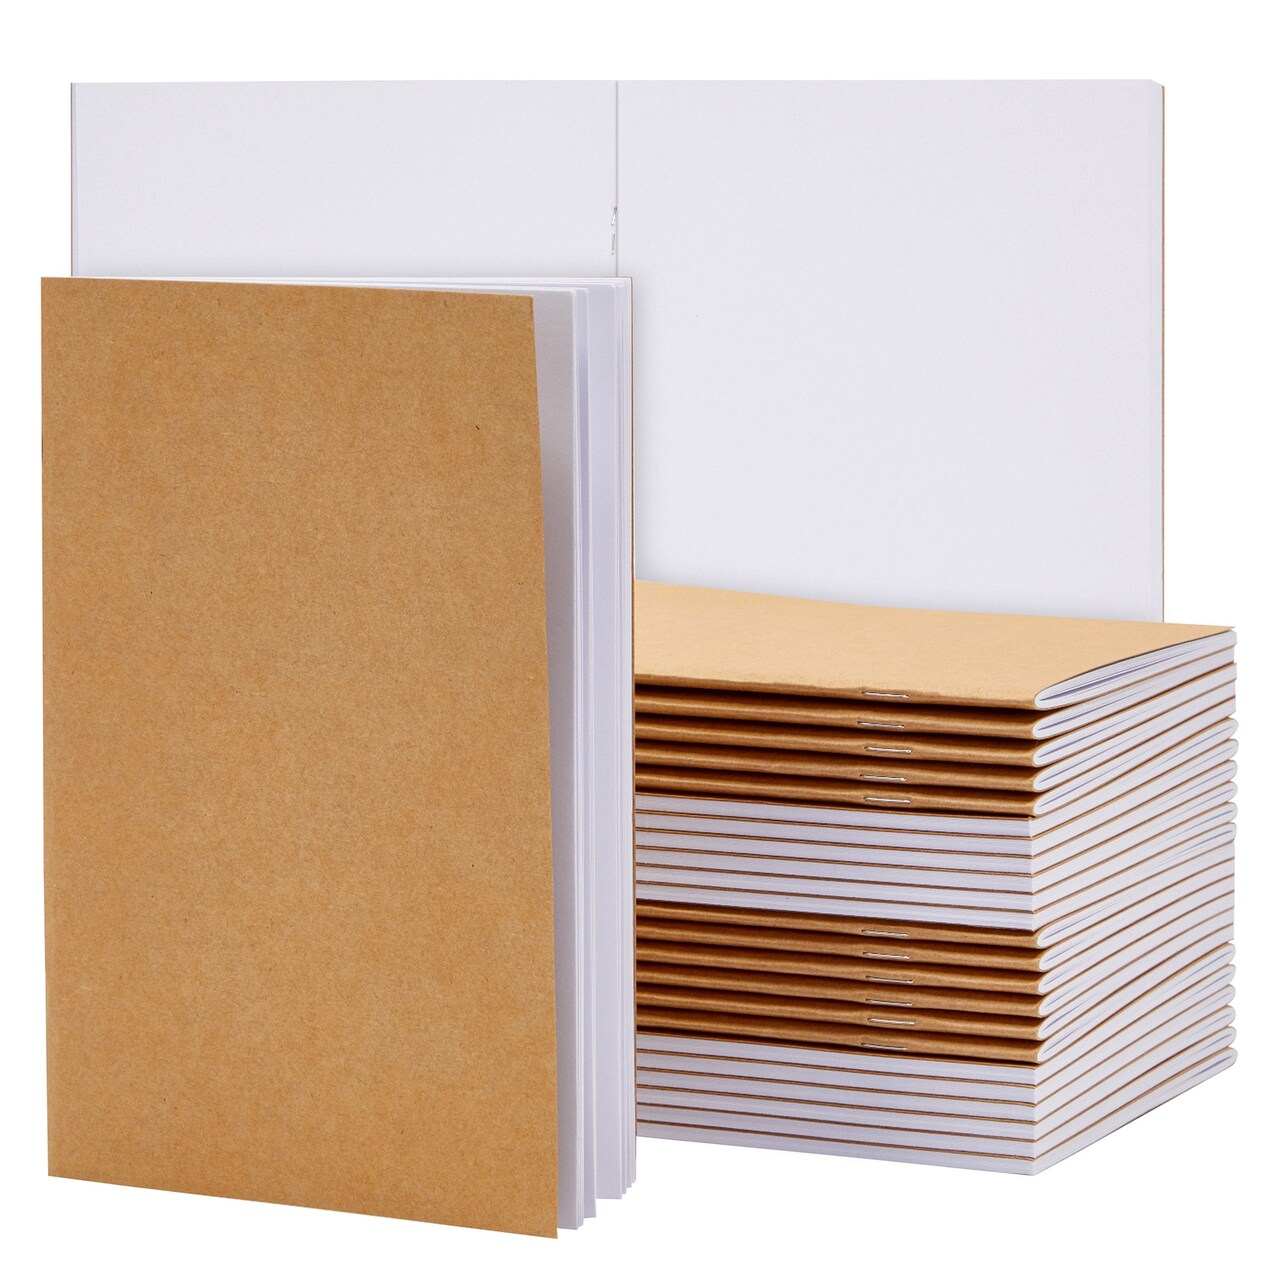 24 Pack Blank Journals Bulk Set, Kraft Paper Blank Book To Write Stories,  5.5 x 8.5 Inch Notebooks for Kids, Drawing, Sketching (A5 Size, Brown)